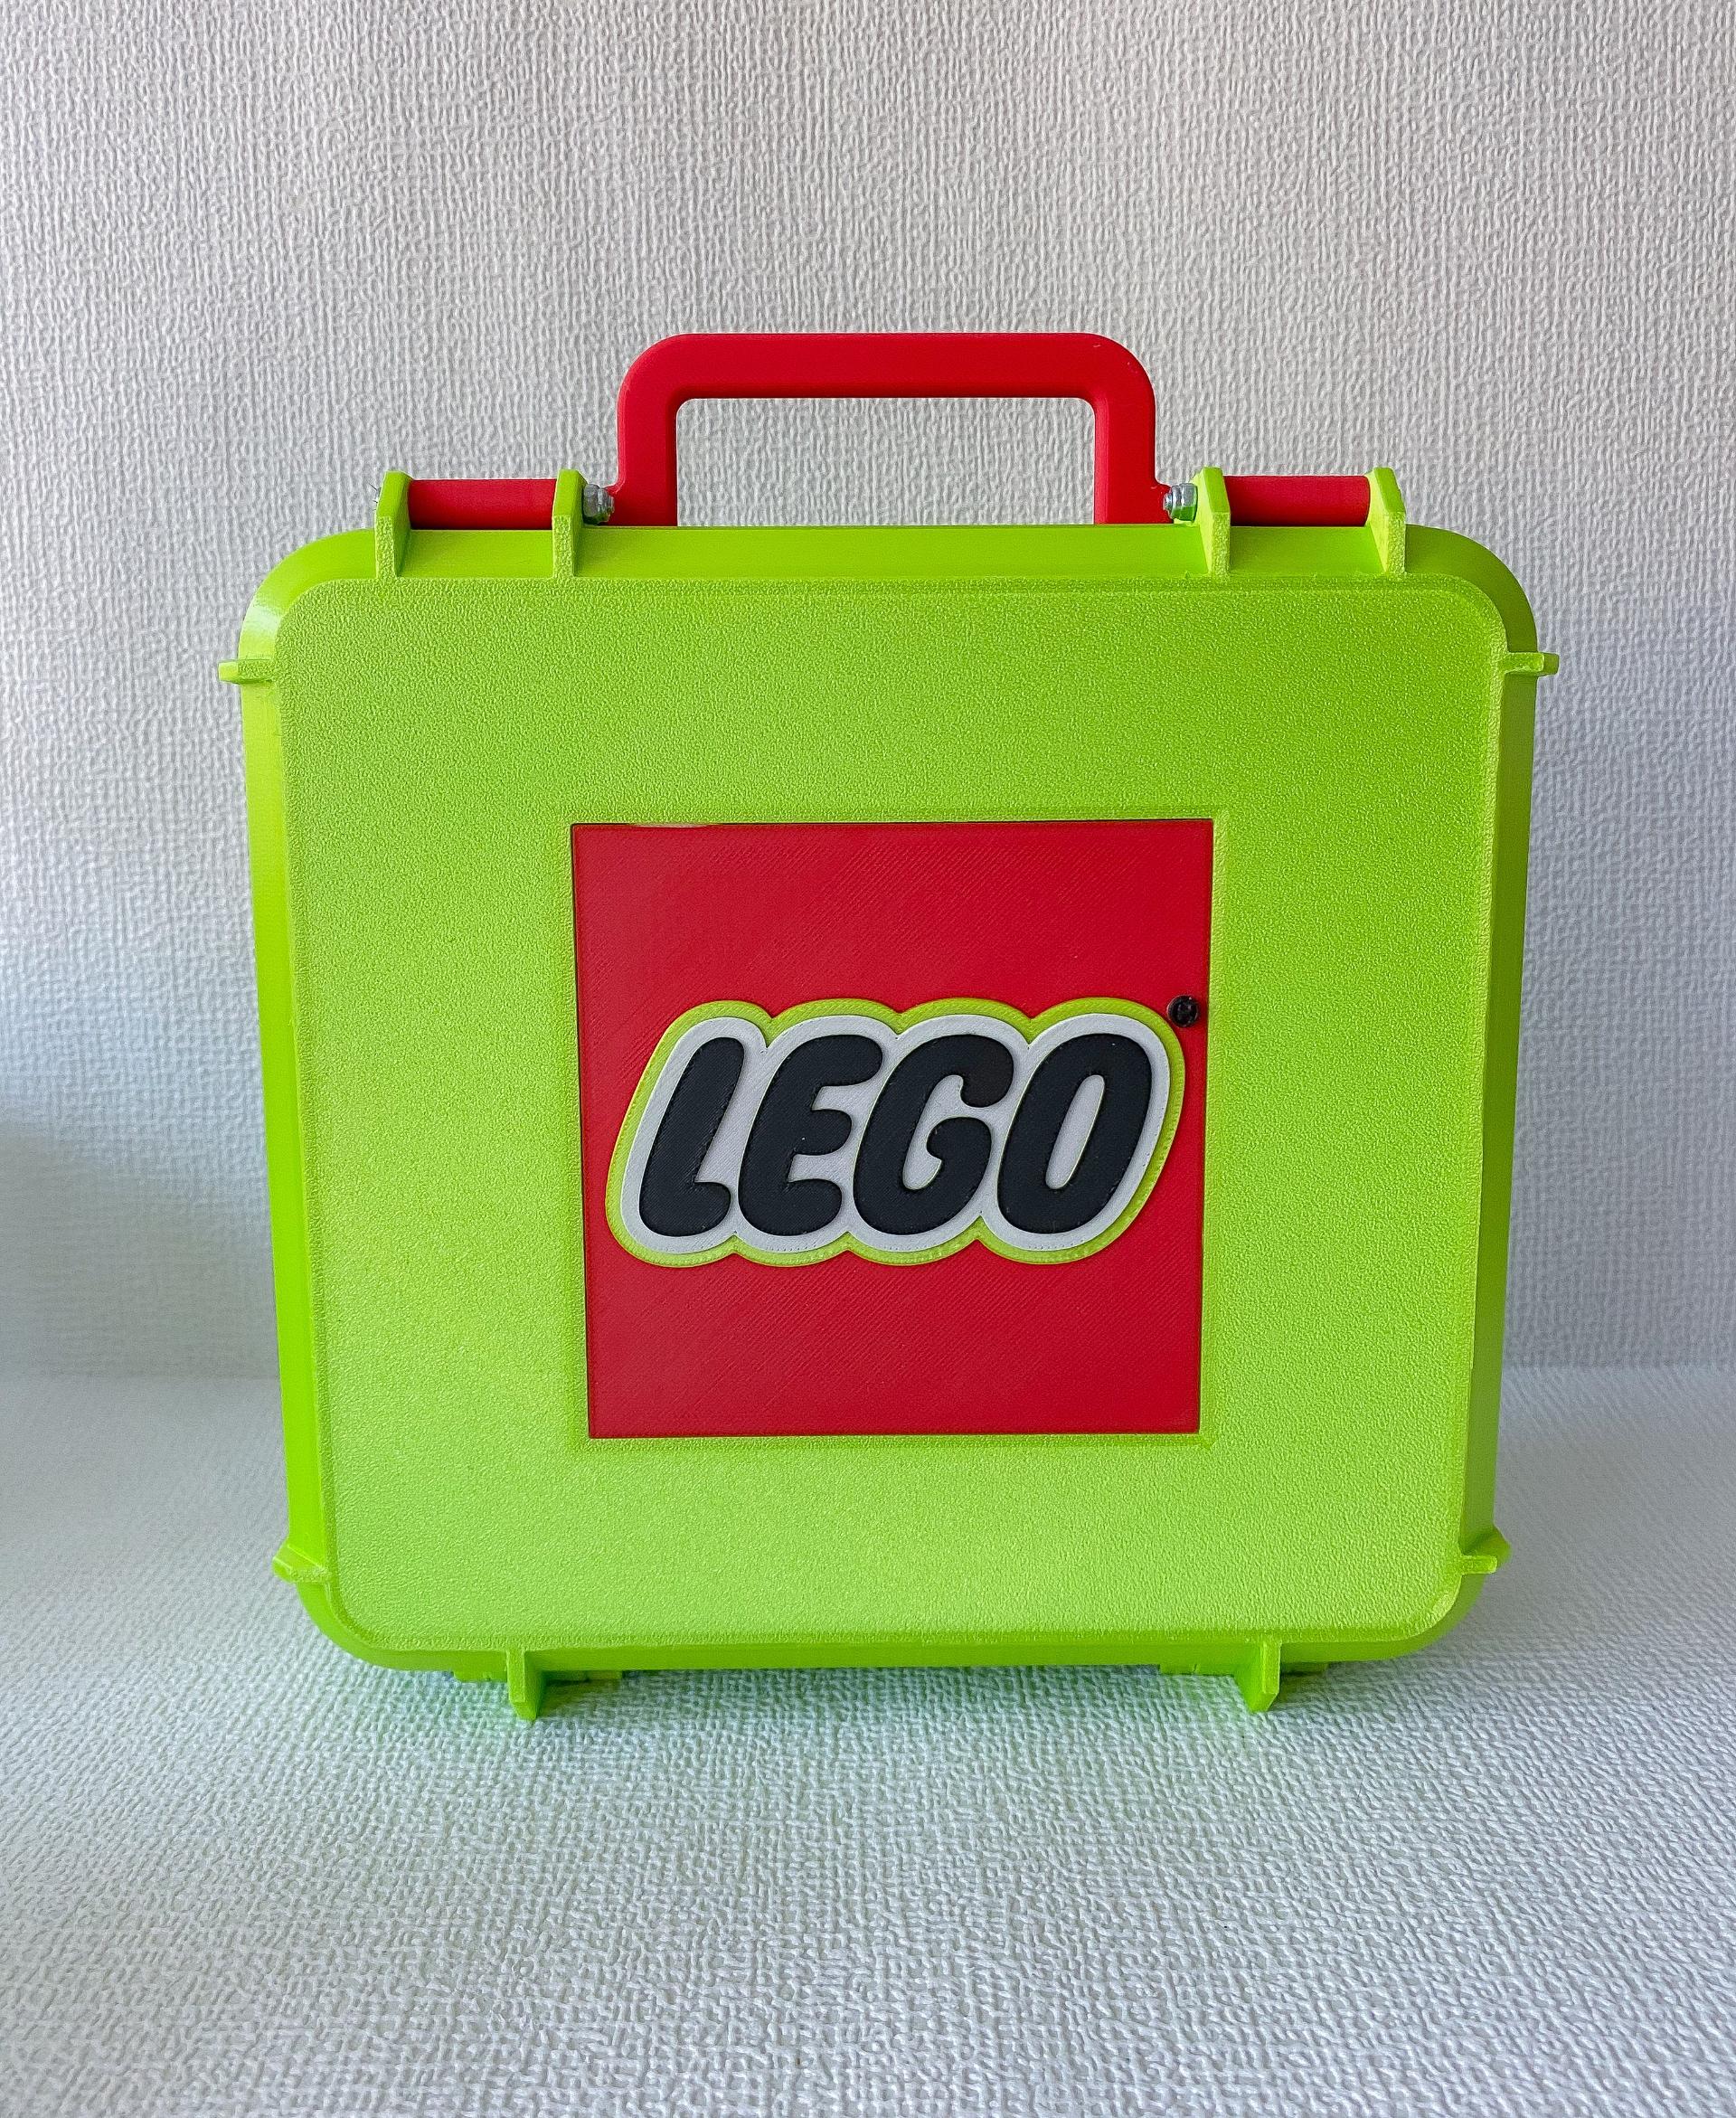 Lego Storage Container 3D model